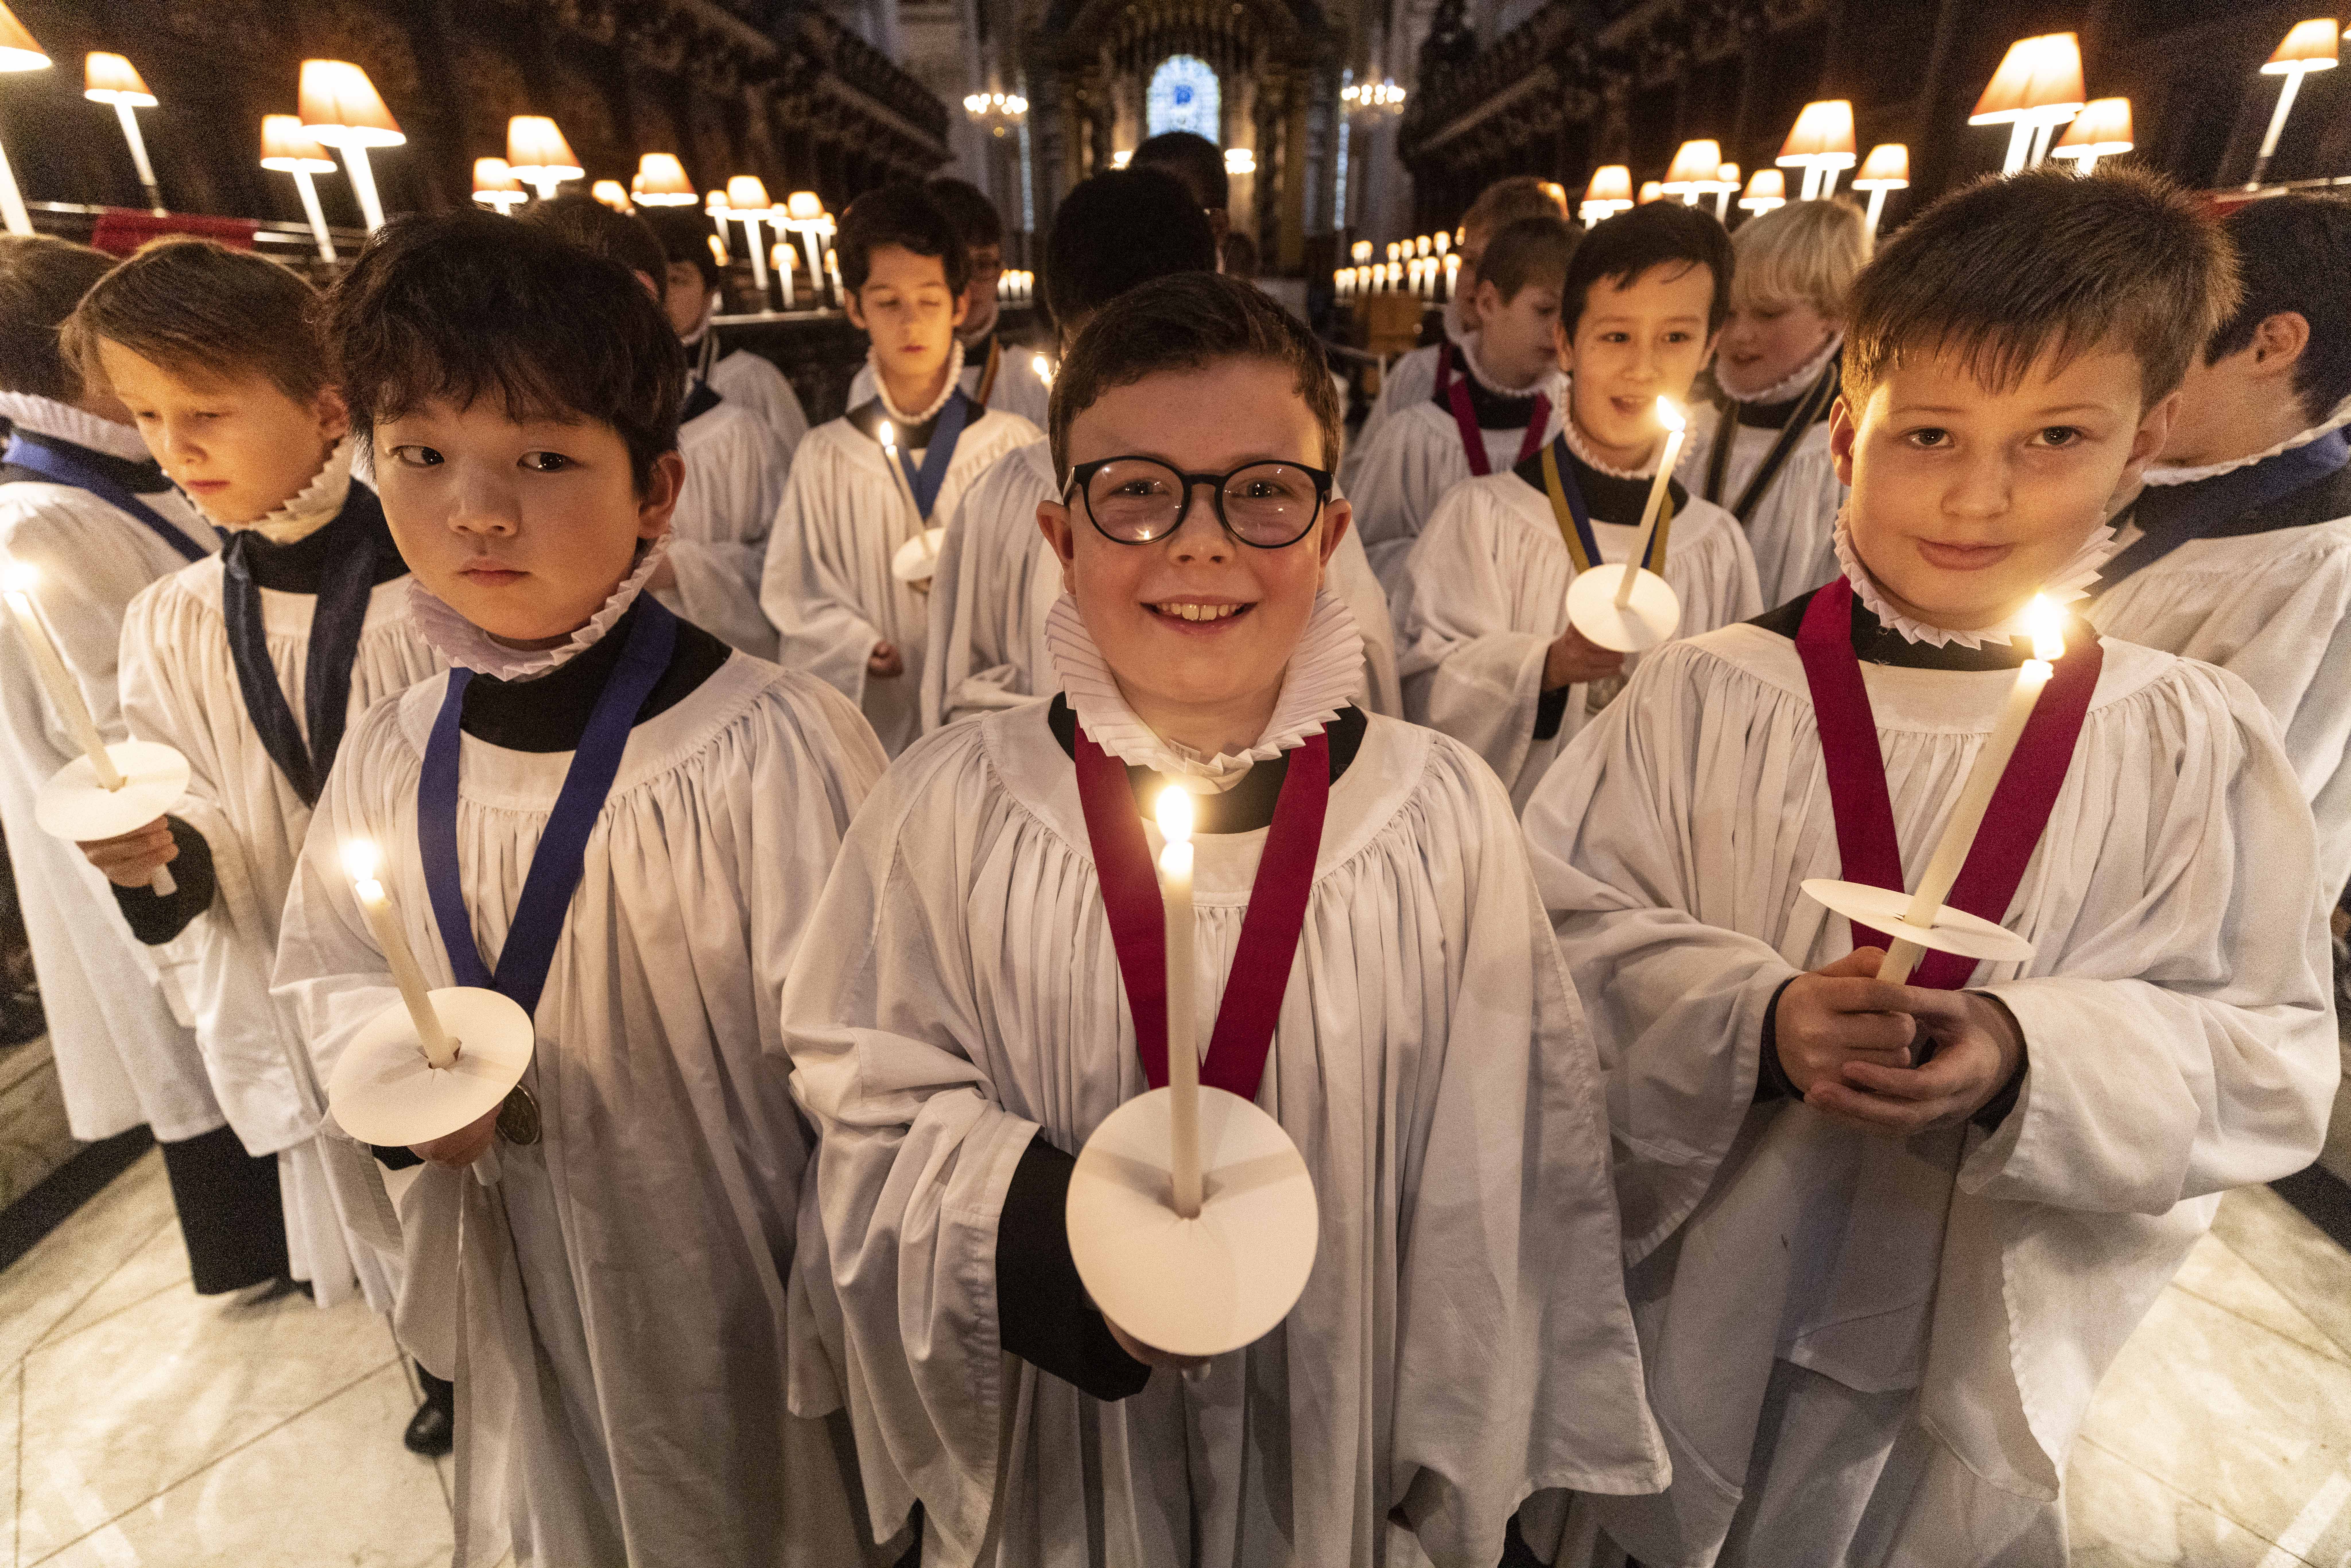 The Christmas Carol service (pictured) takes place at St Paul's Cathedral in central London